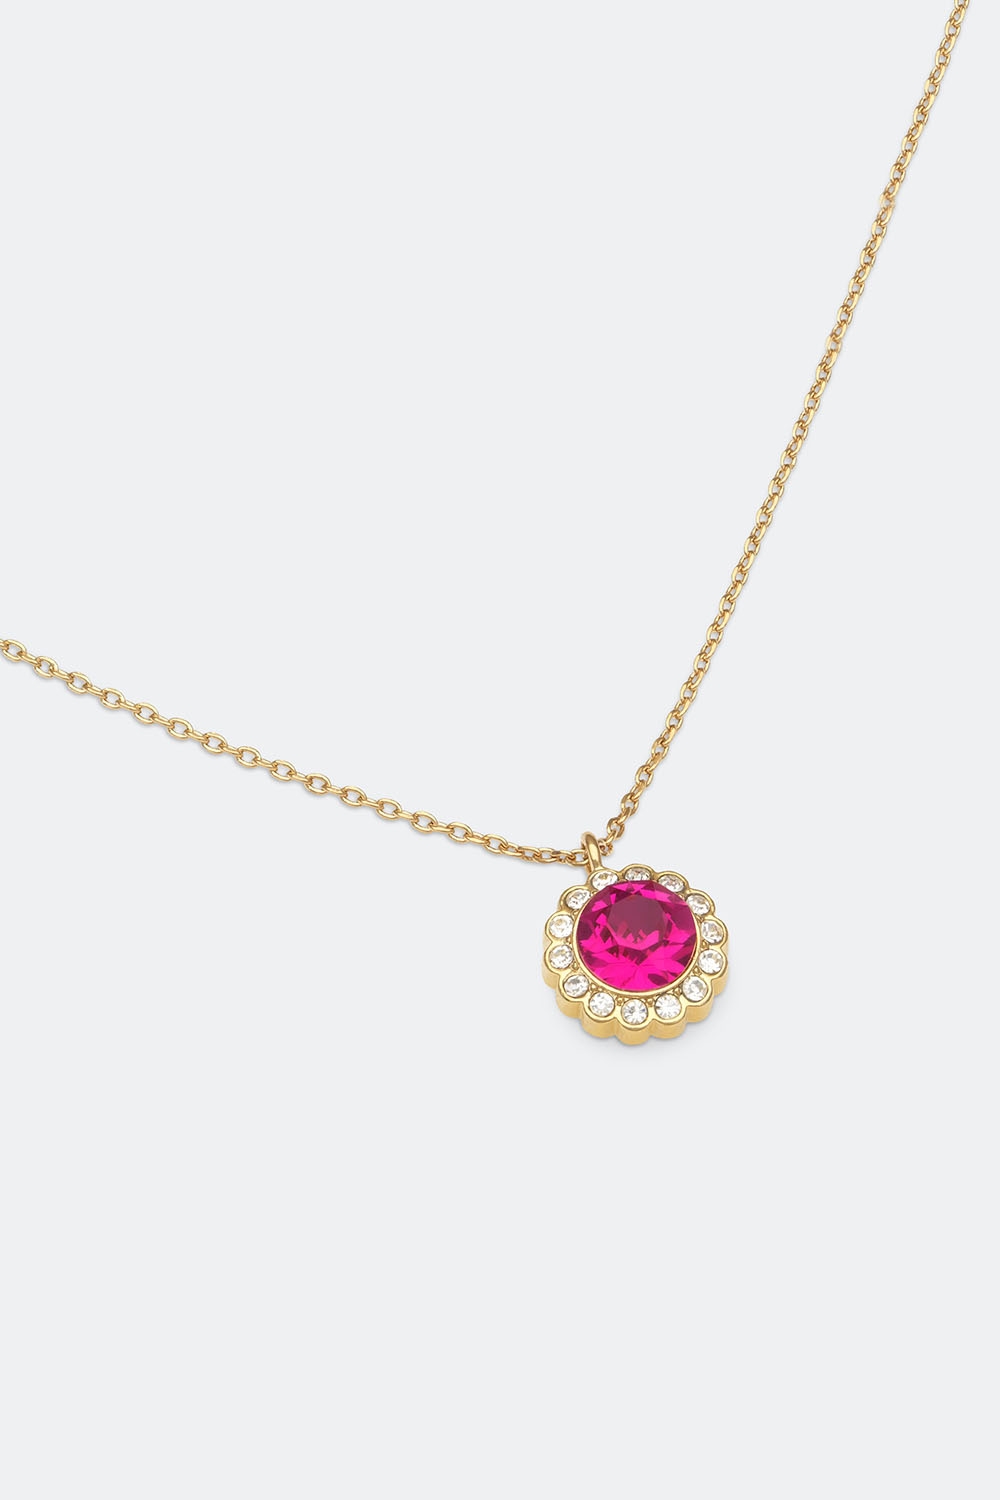 Miss Bea necklace - Intense pink i gruppen Lily and Rose - Halsband hos Glitter (254000515502)